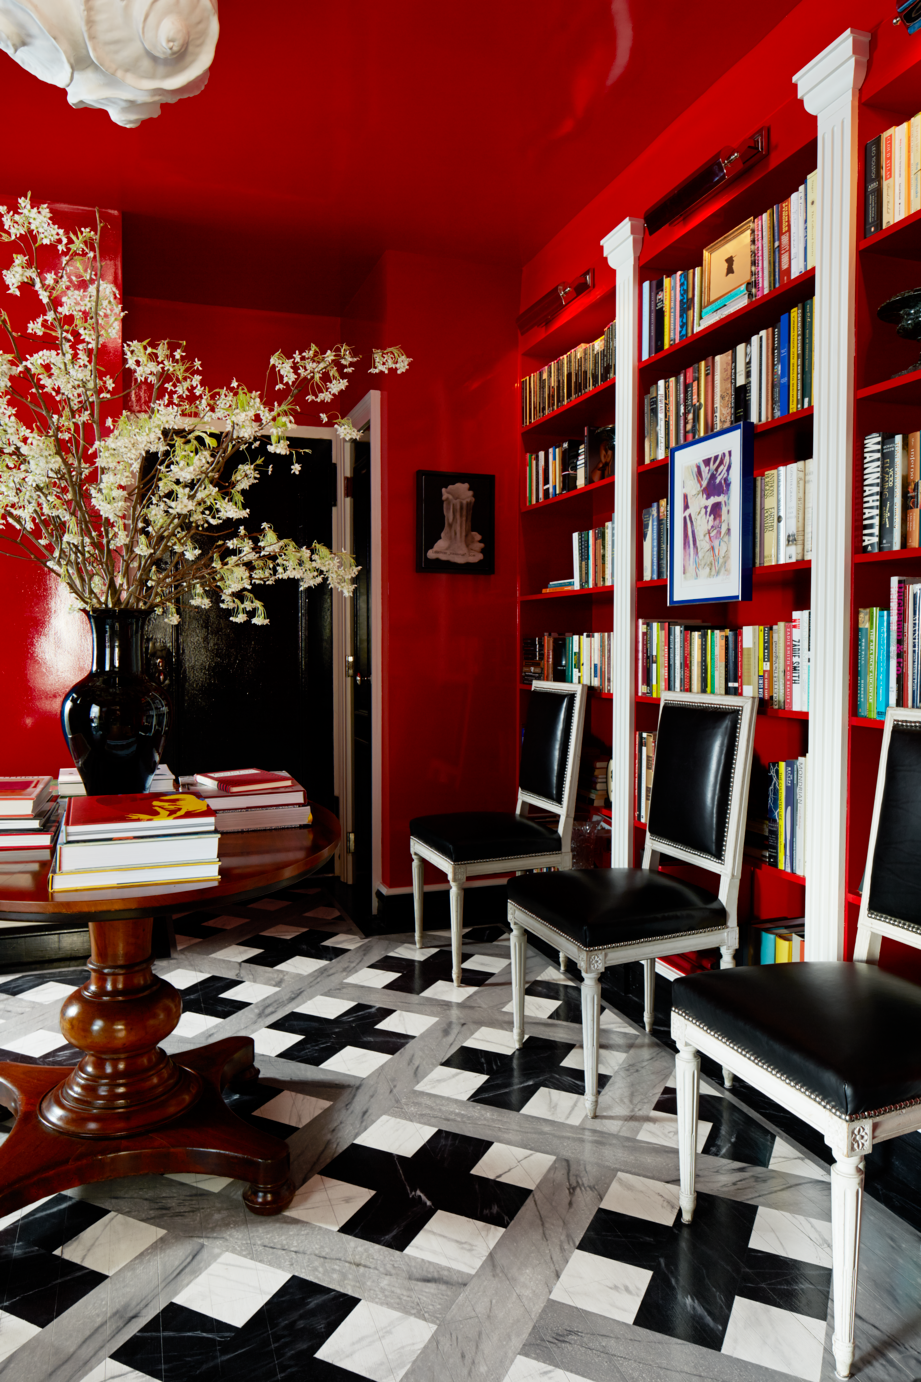 15 Colors That Go With Red, According to Designers